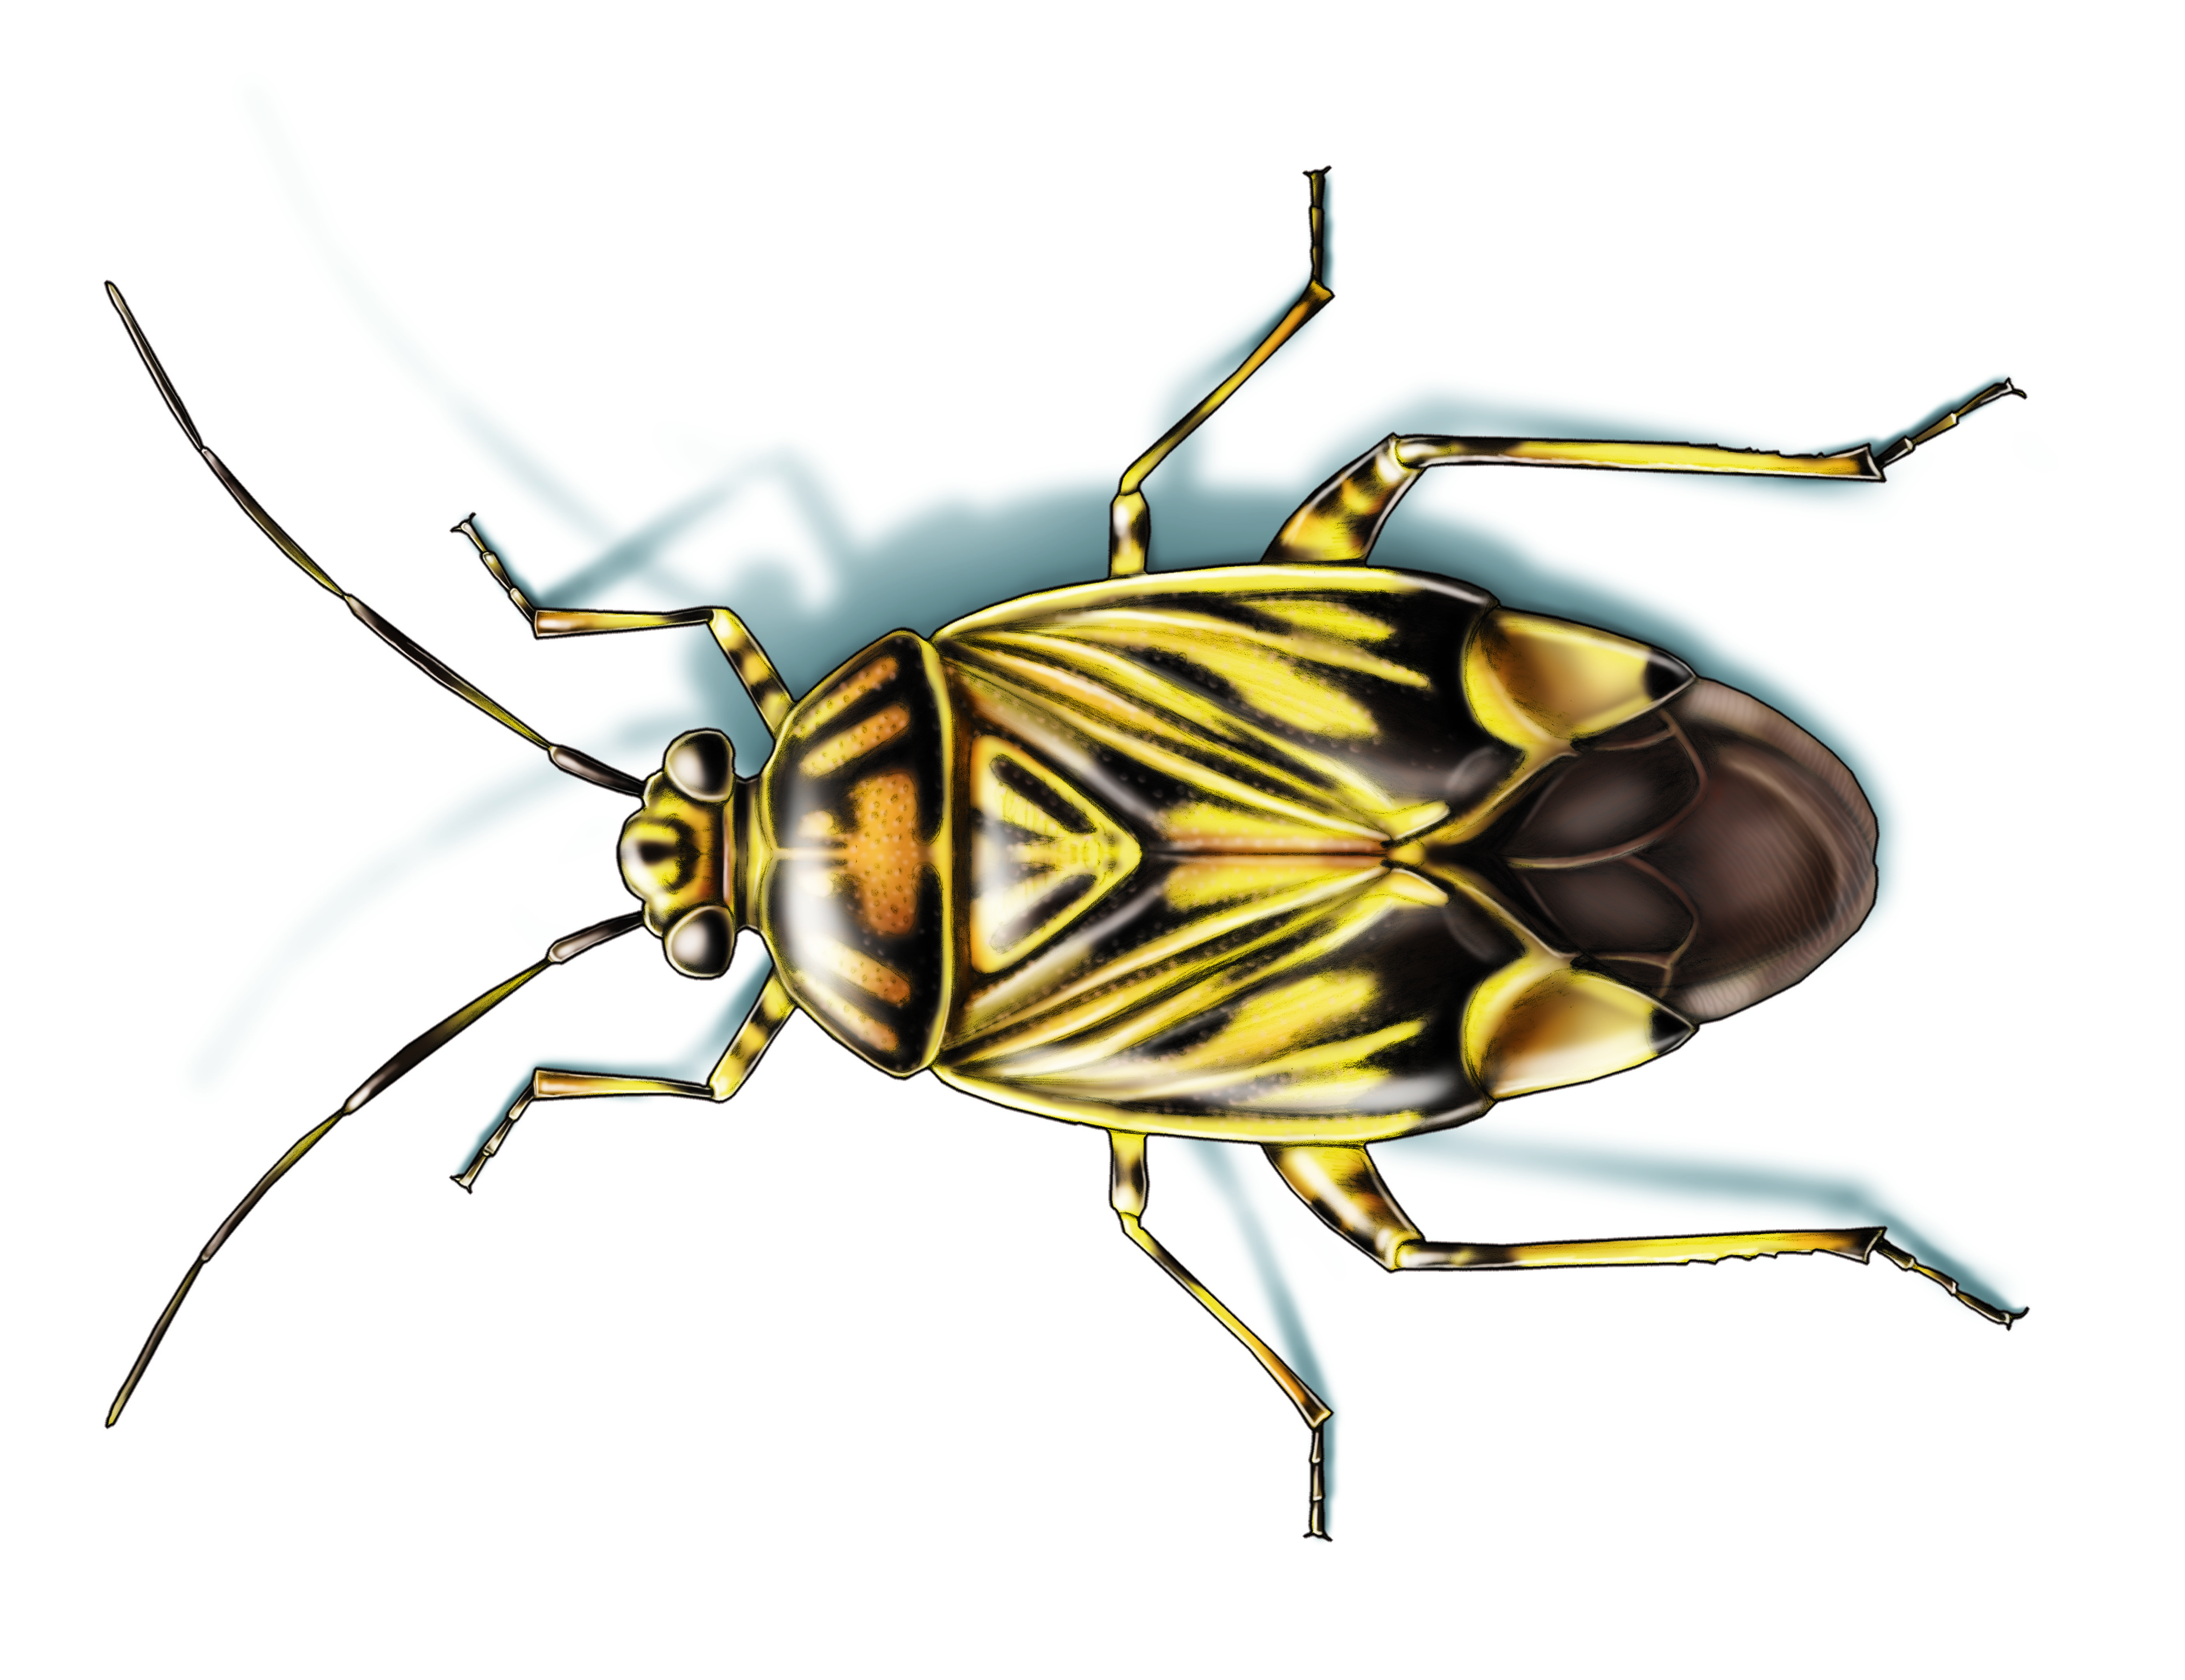 This illustrated image shows a tarnished plant bug